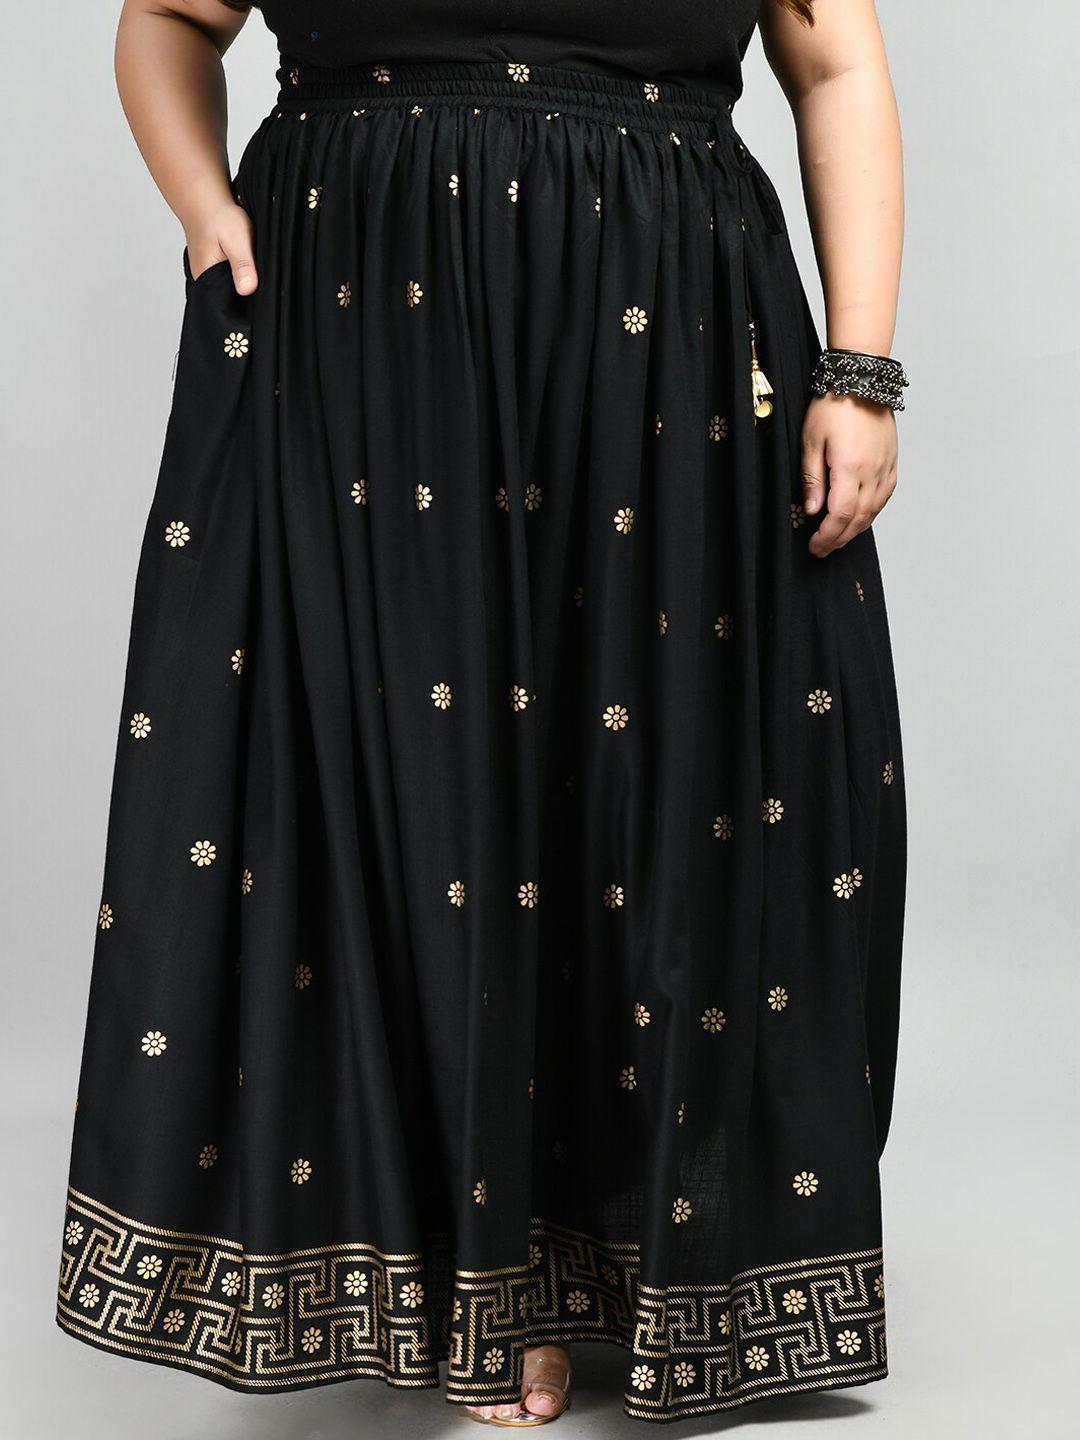 prettyplus by desinoor.com floral printed gathered maxi flared skirt